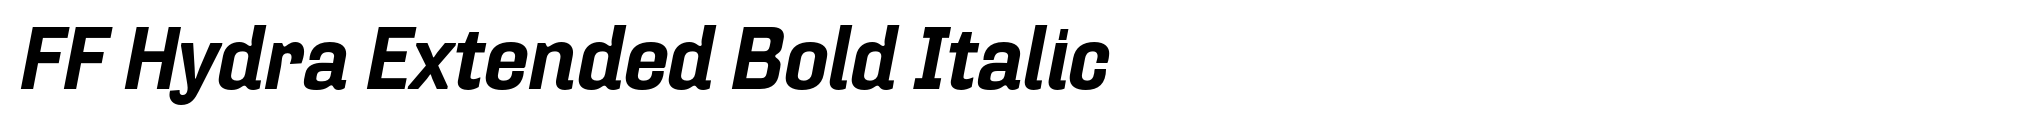 FF Hydra Extended Bold Italic image